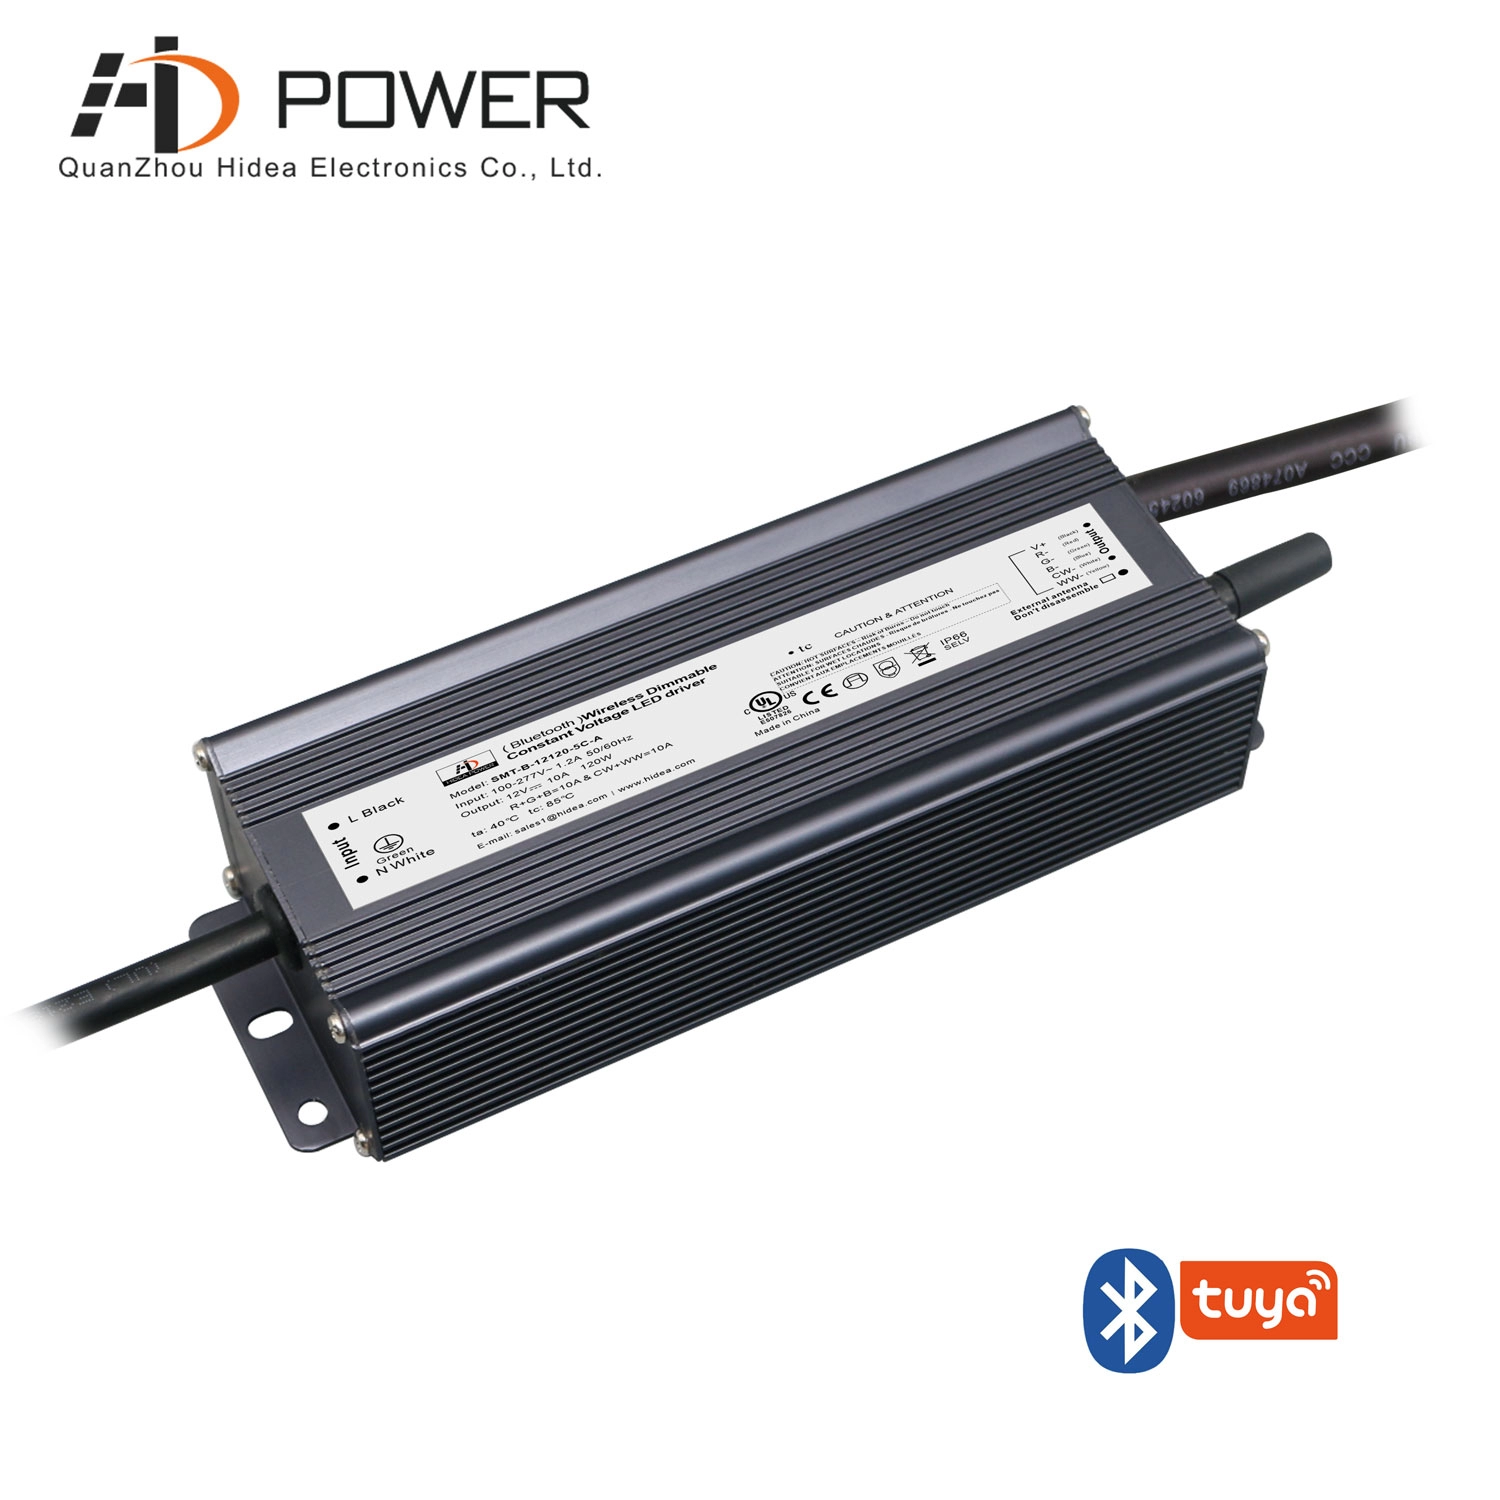 IP67 multi-channel bluetooth dimbare led-driver 120w voor RGBCW-verlichting